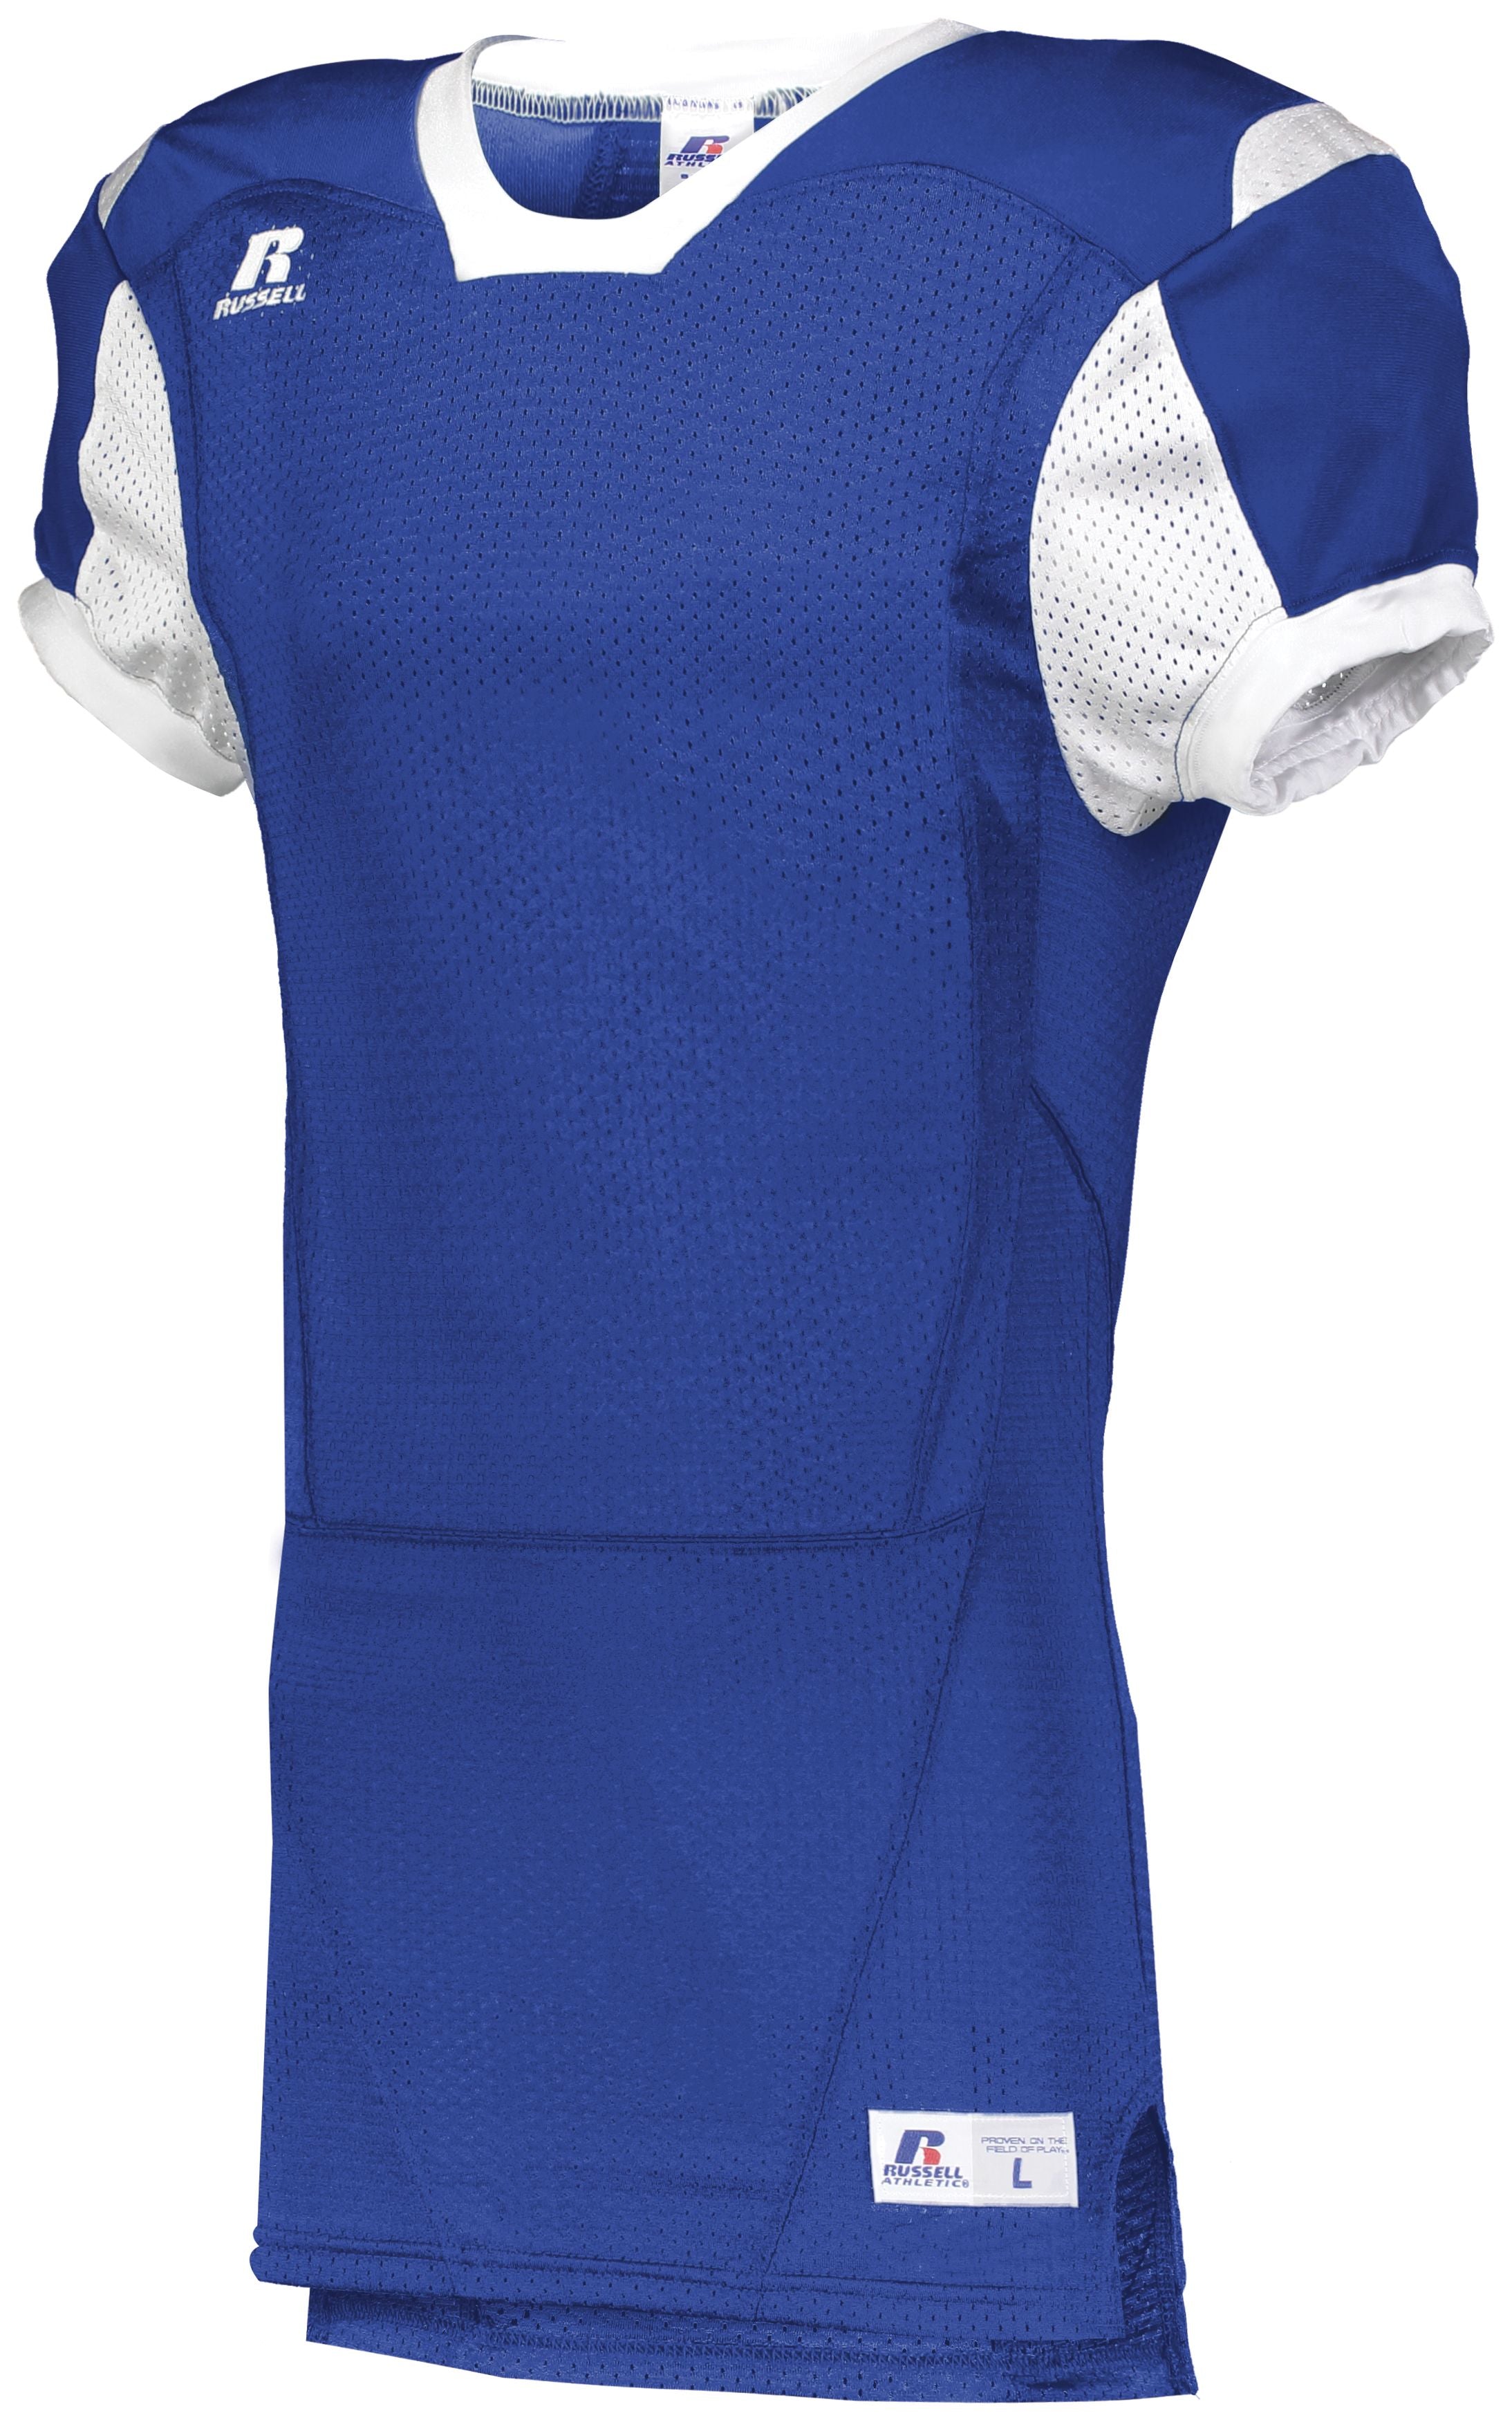 Russell Athletic Color Block Game Jersey in Royal/White  -Part of the Adult, Adult-Jersey, Football, Russell-Athletic-Products, Shirts, All-Sports, All-Sports-1 product lines at KanaleyCreations.com